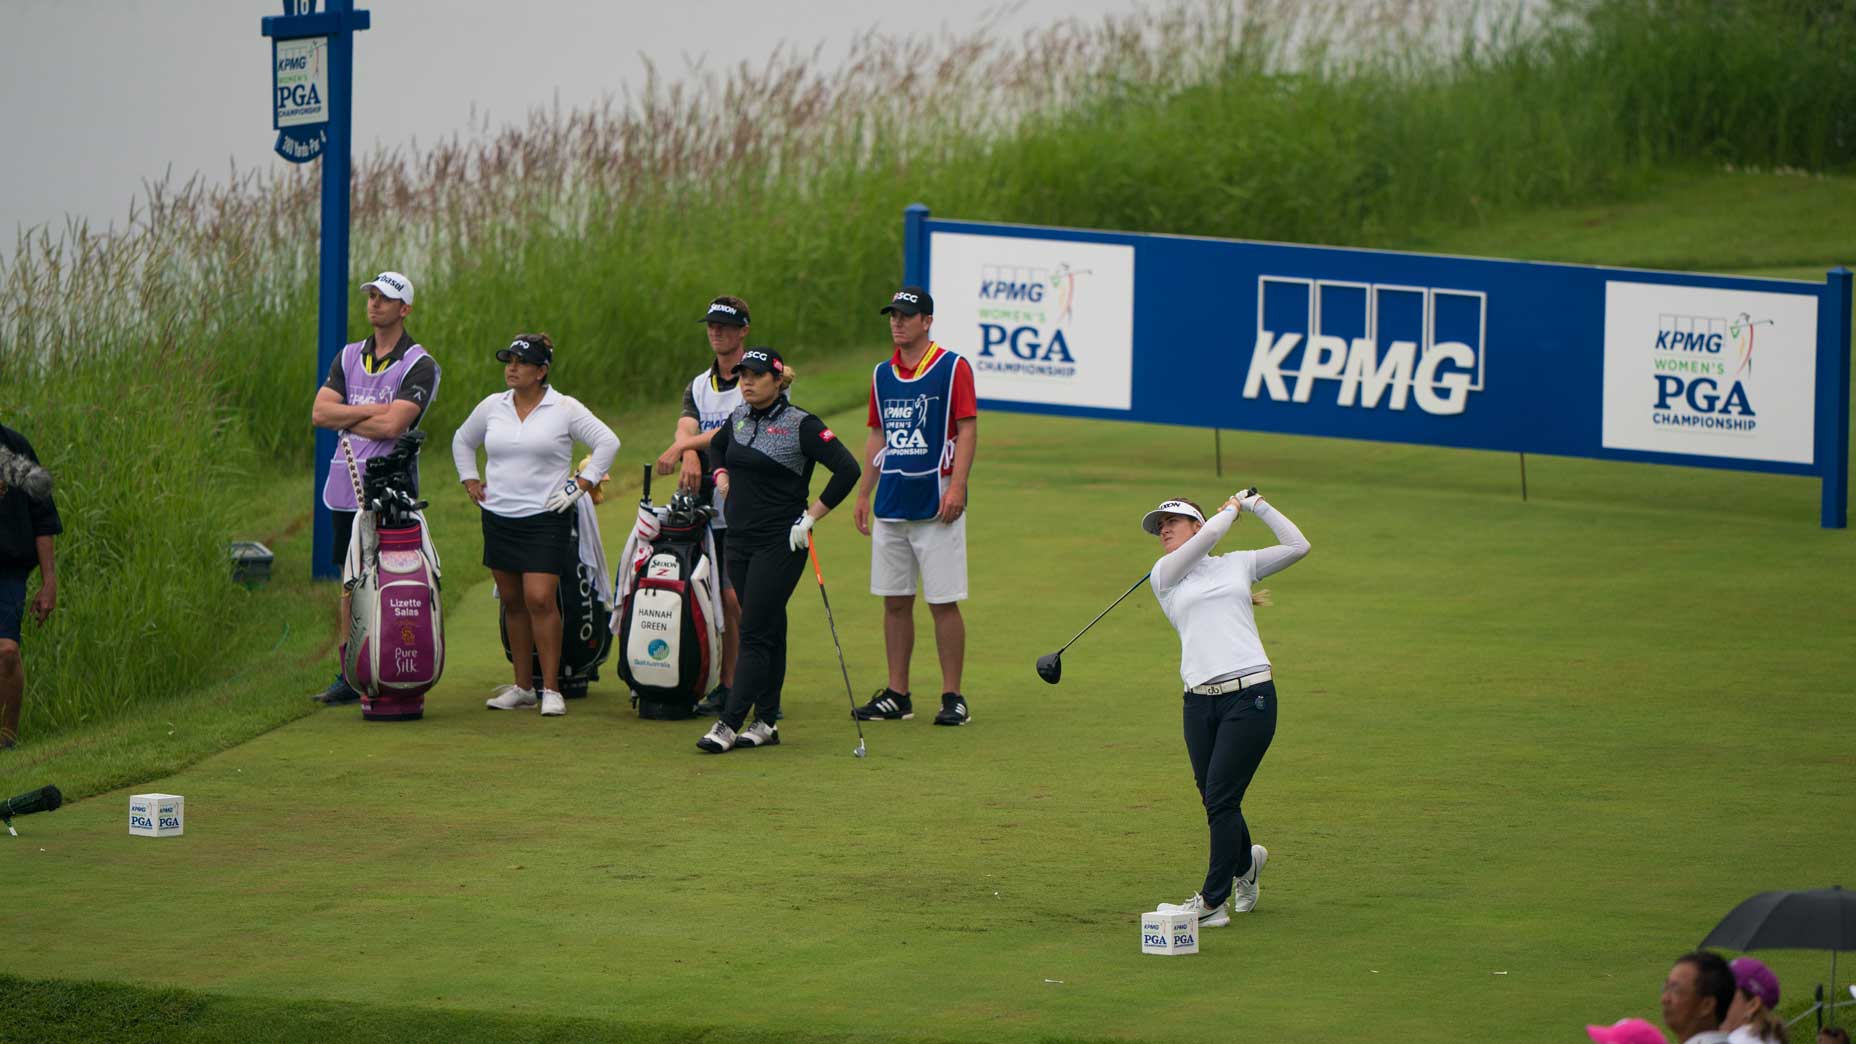 2020 KPMG Womens PGA Championship How to watch on TV, online